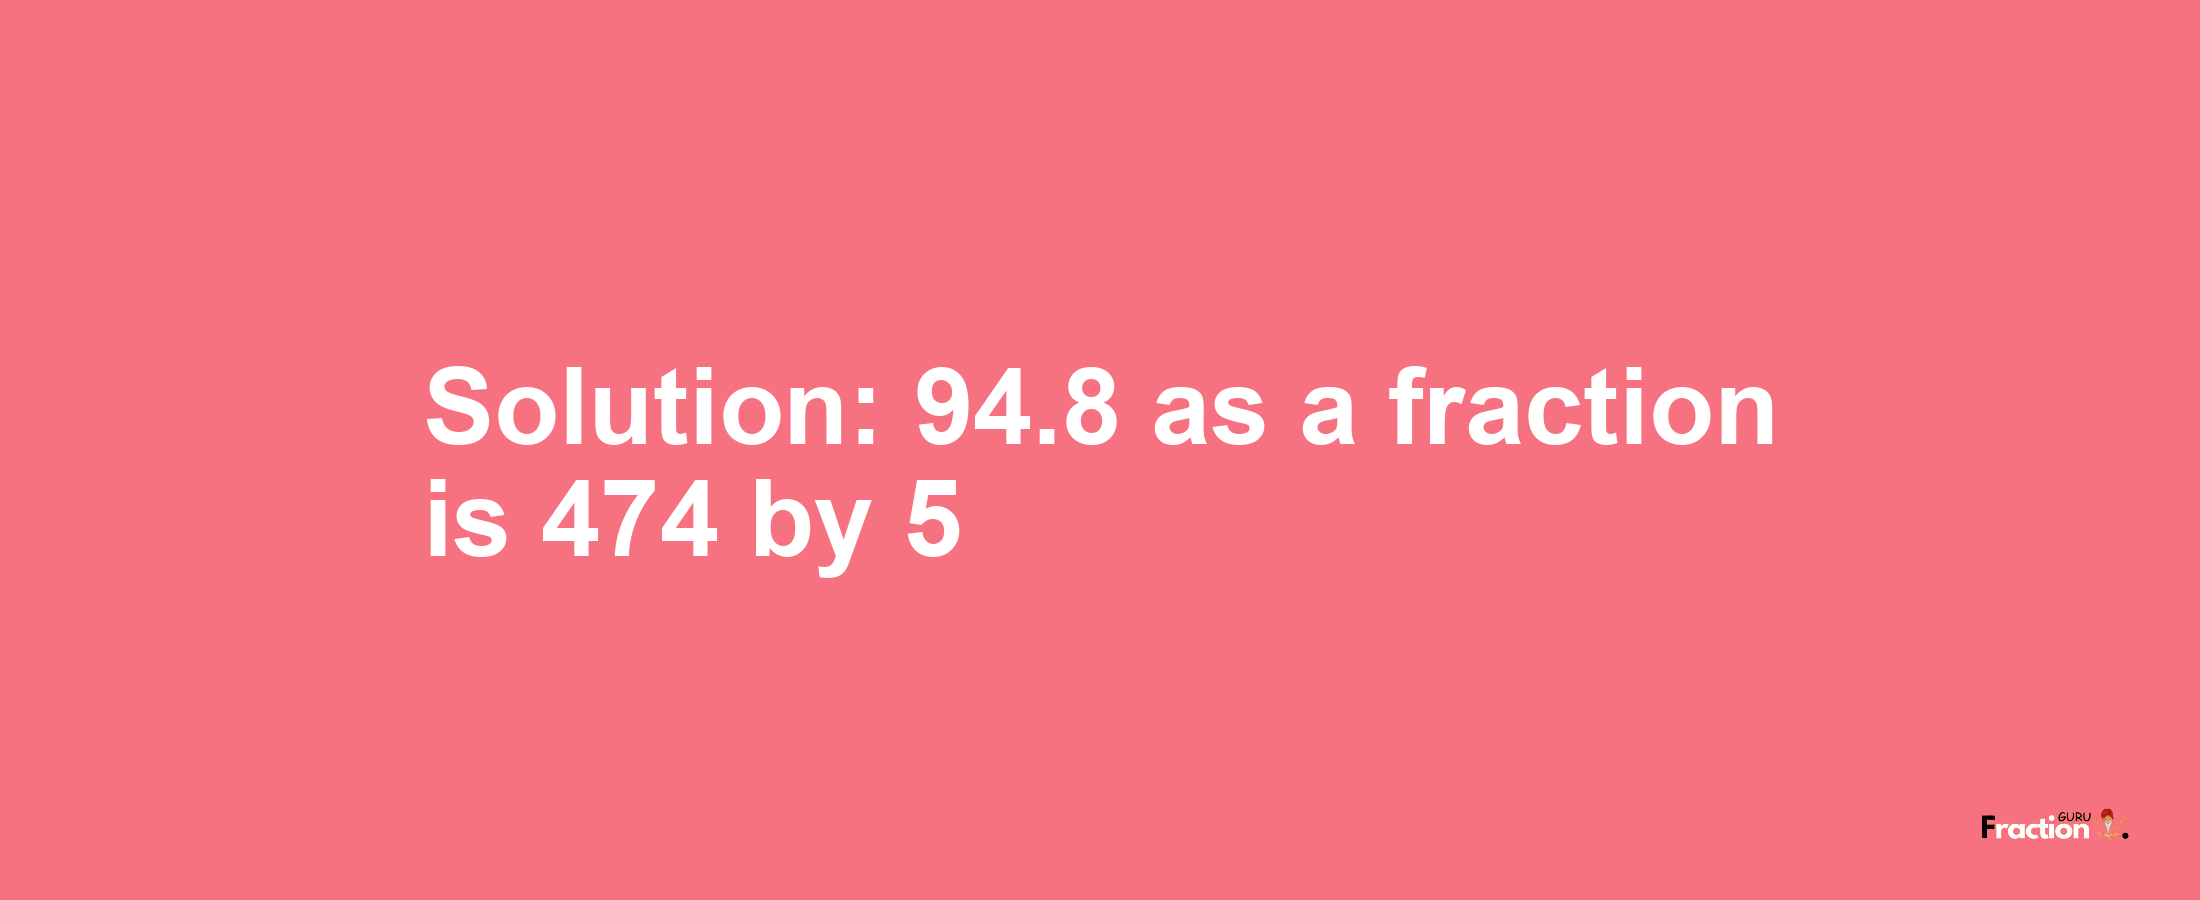 Solution:94.8 as a fraction is 474/5